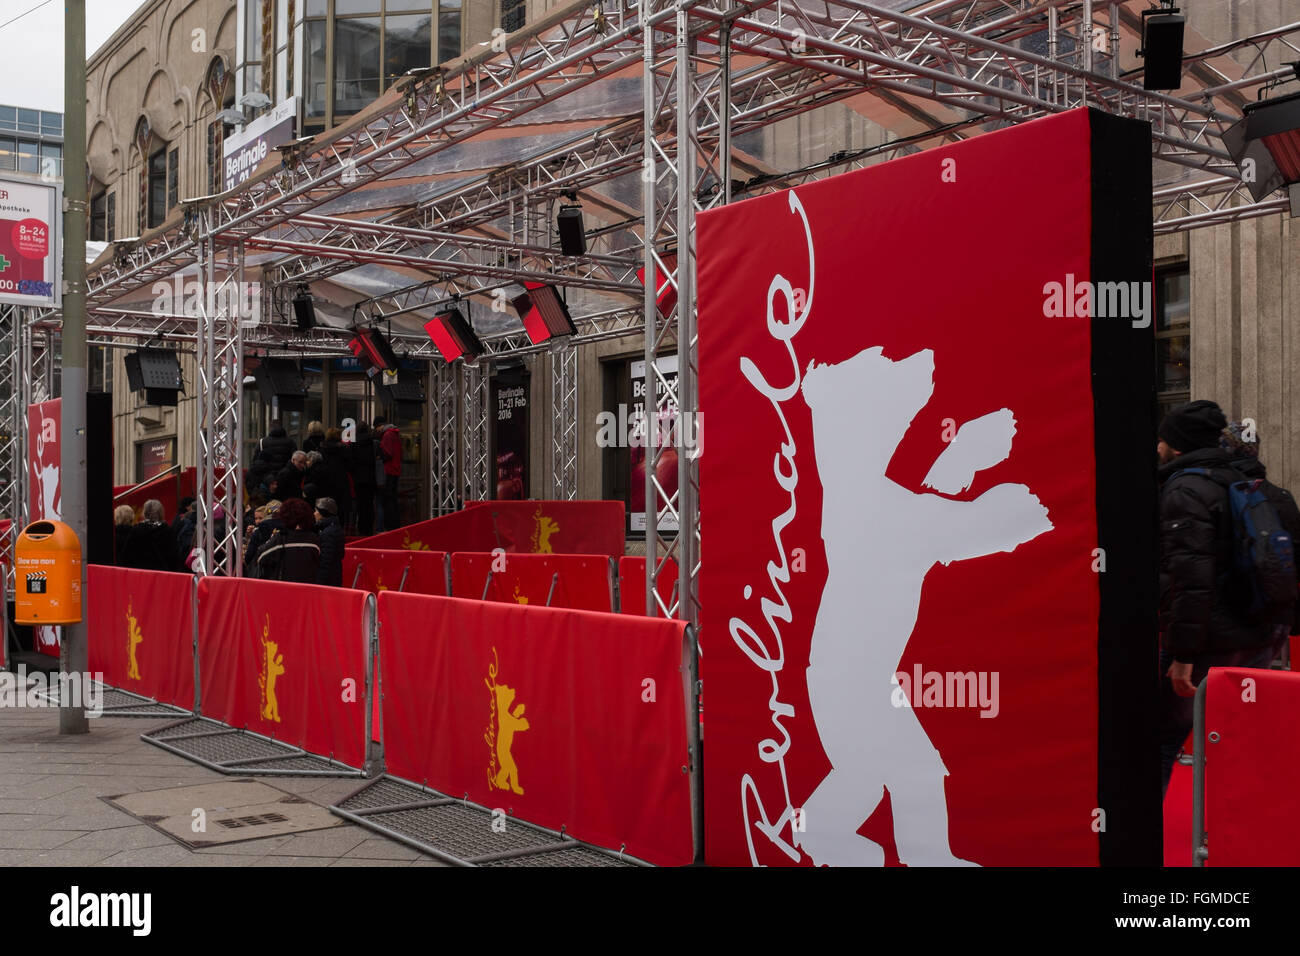 BERLIN, FEBRUARY 19: The Berlinale in the Friedrichstadt-Palast in Berlin Mitte on February 19, 2016. The Berlin International F Stock Photo